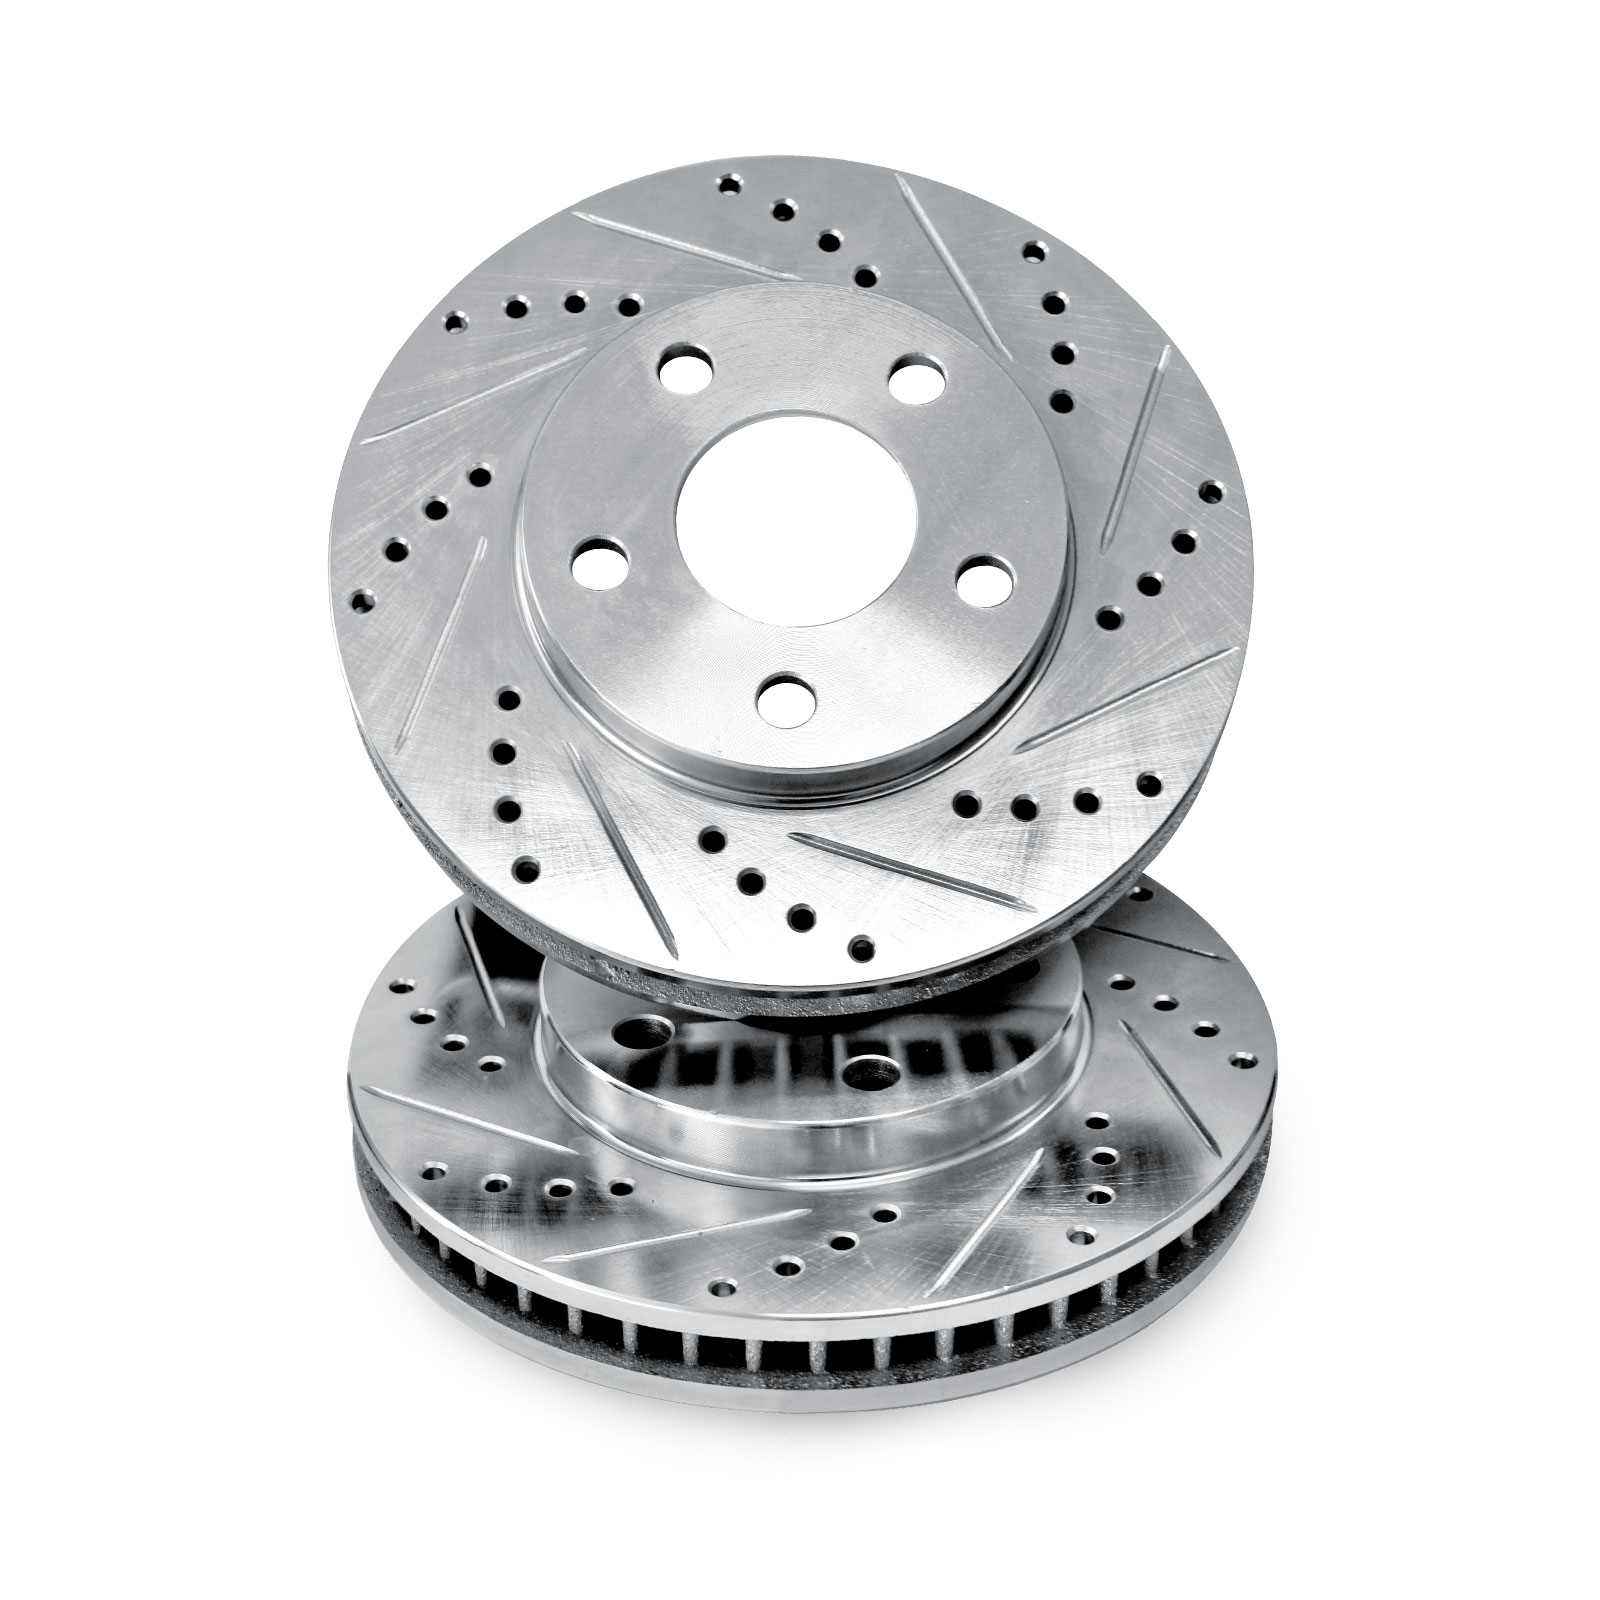 Brake Rotors 2 FRONT ELINE "DRILLED AND SLOTTED" PERFORMANCE DISC RQ36044 